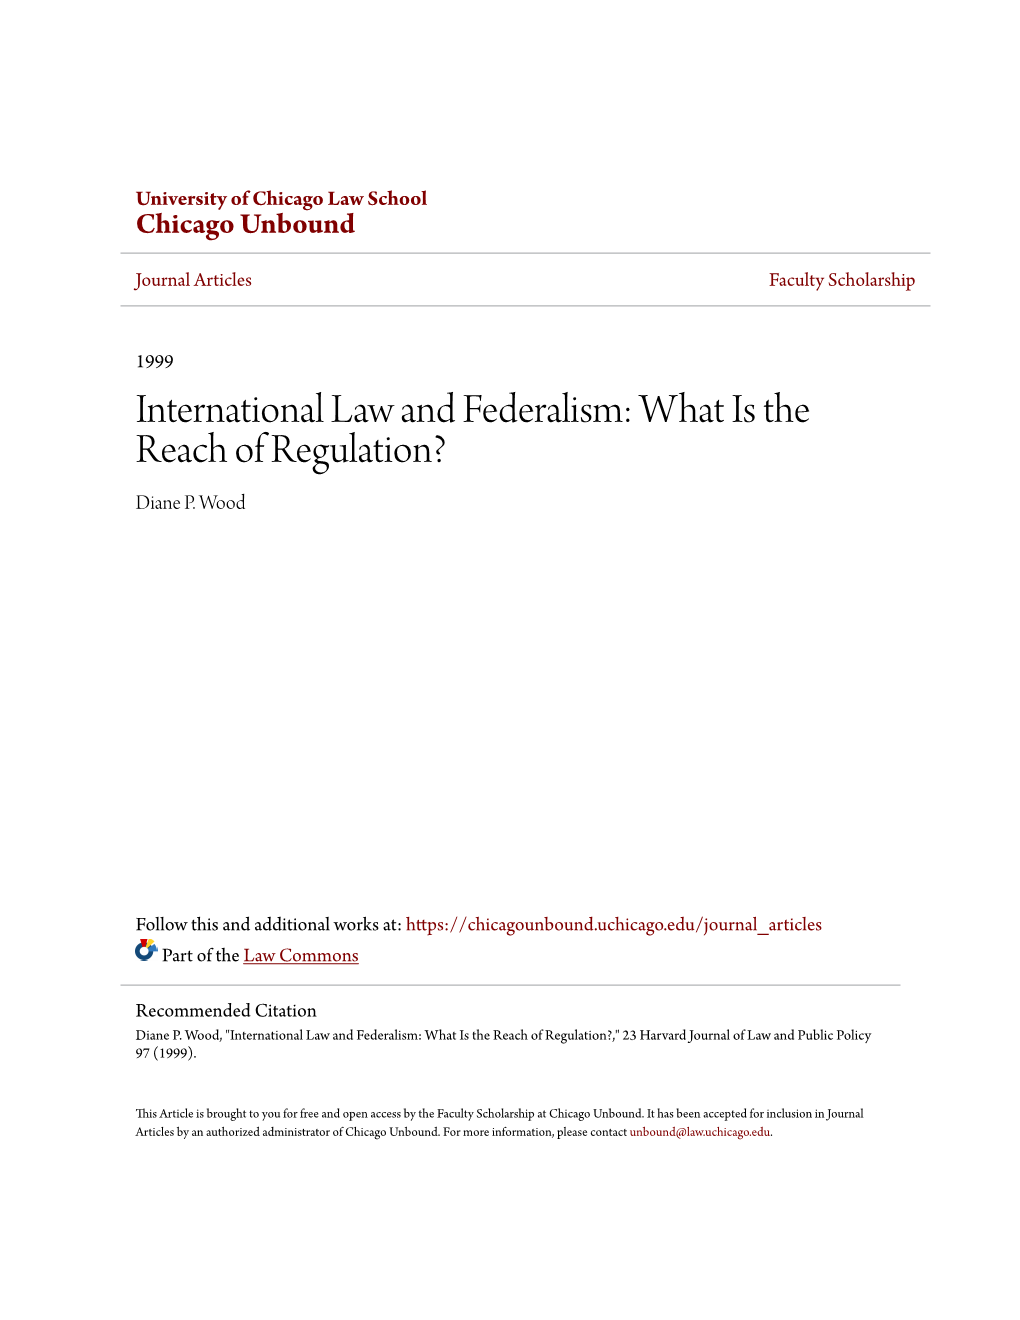 International Law and Federalism: What Is the Reach of Regulation? Diane P